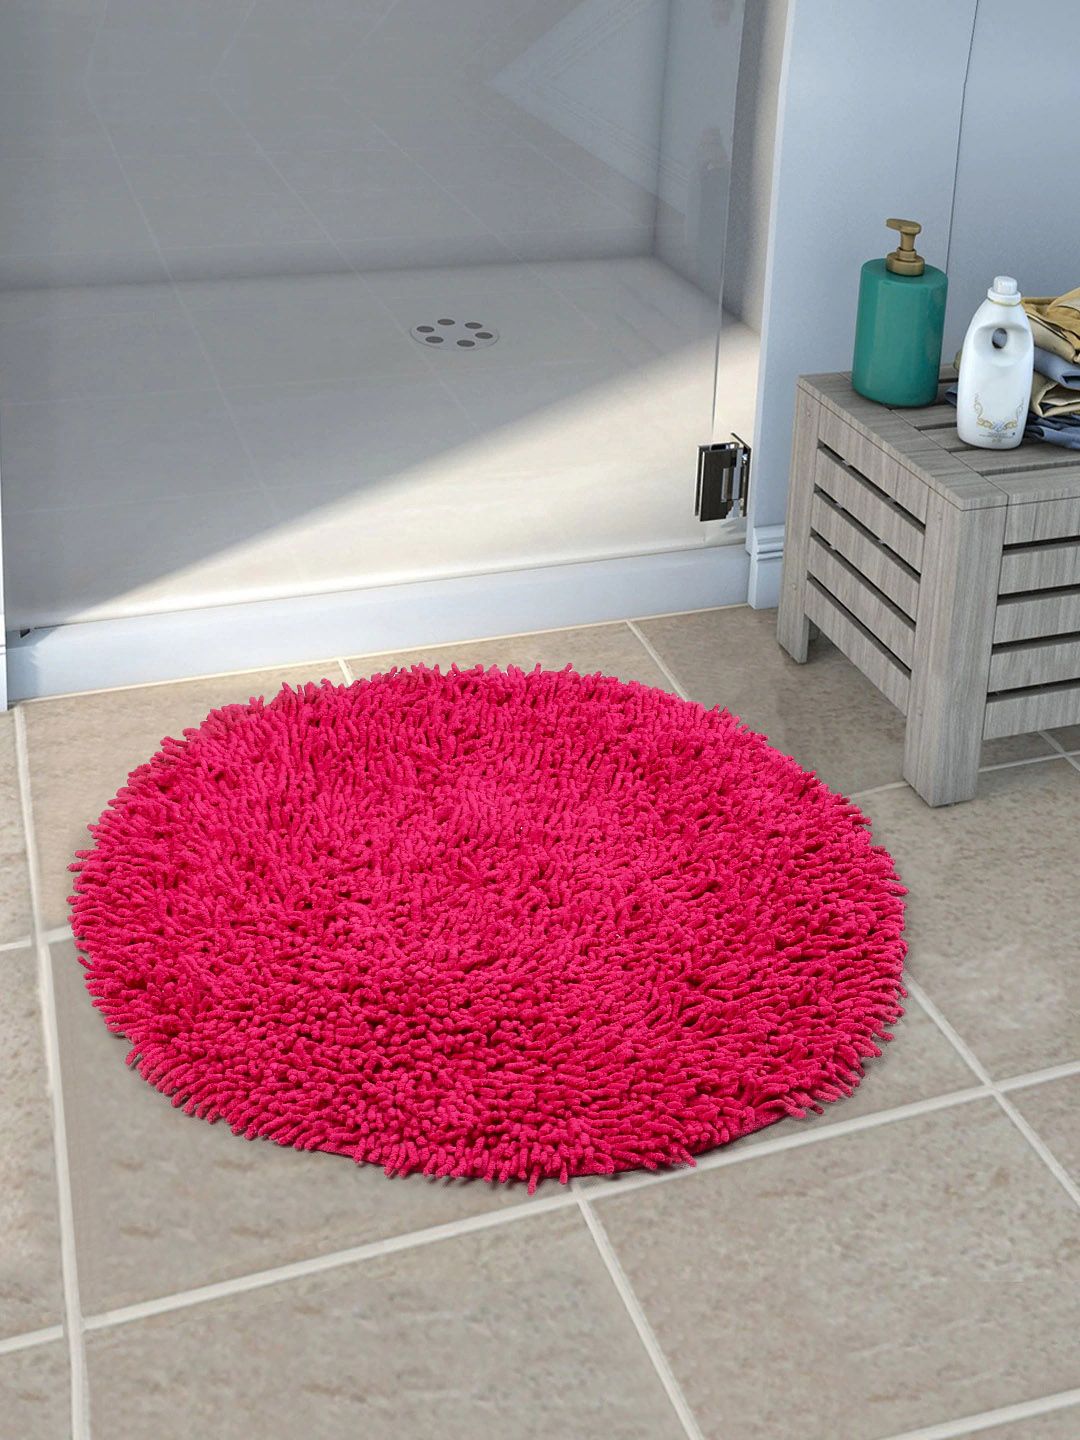 Saral Home Pink Solid Shaggy Mat Price in India